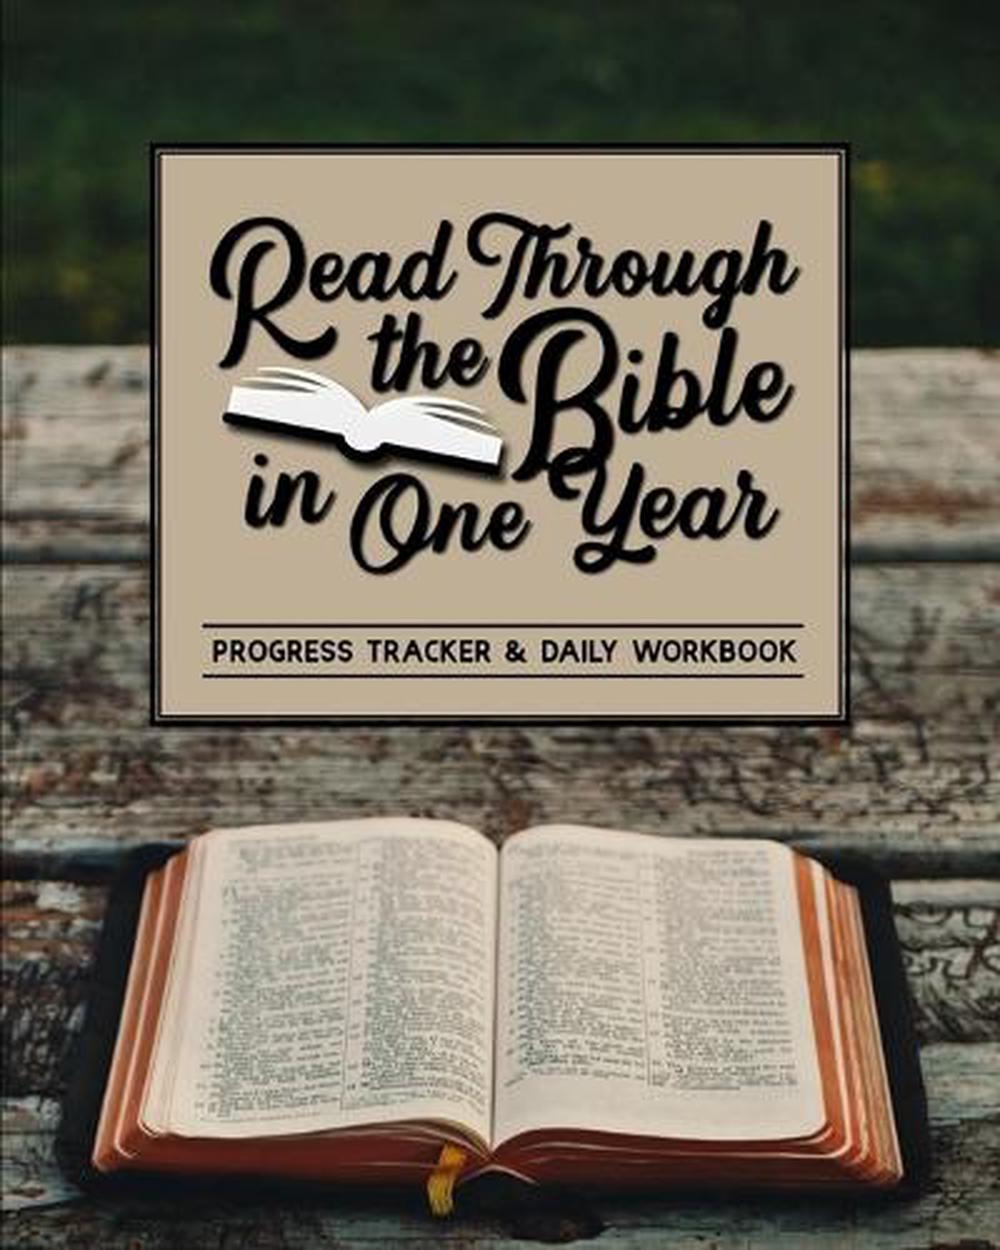 Read Through the Bible in One Year Progress Tracker & Daily Workbook